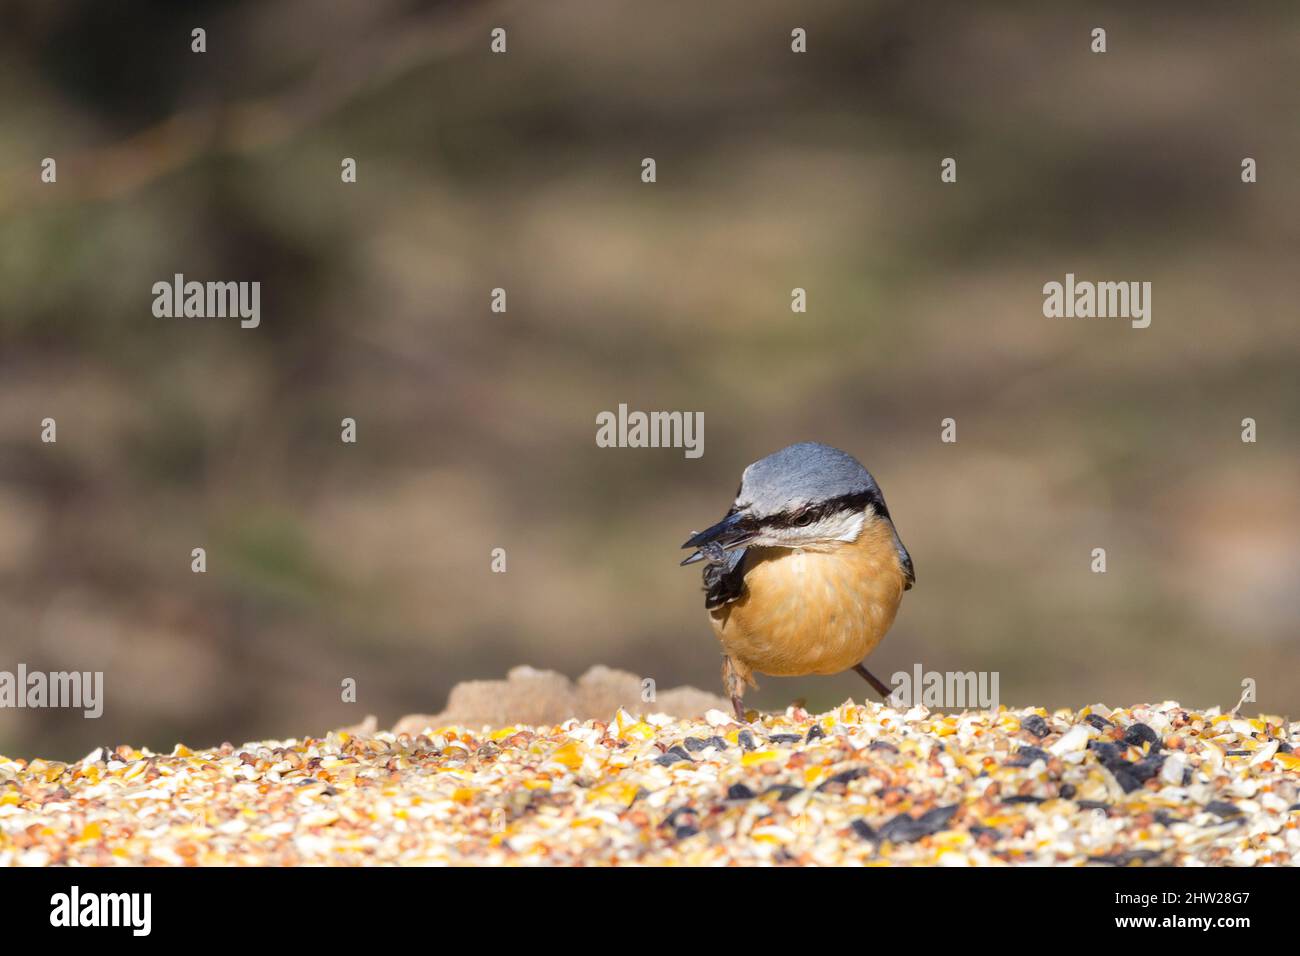 Nuthatch (Sitta europaea) blue grey upperparts white cheeks black line through eyes reddish buff underside strong pointed black bill and short tail Stock Photo